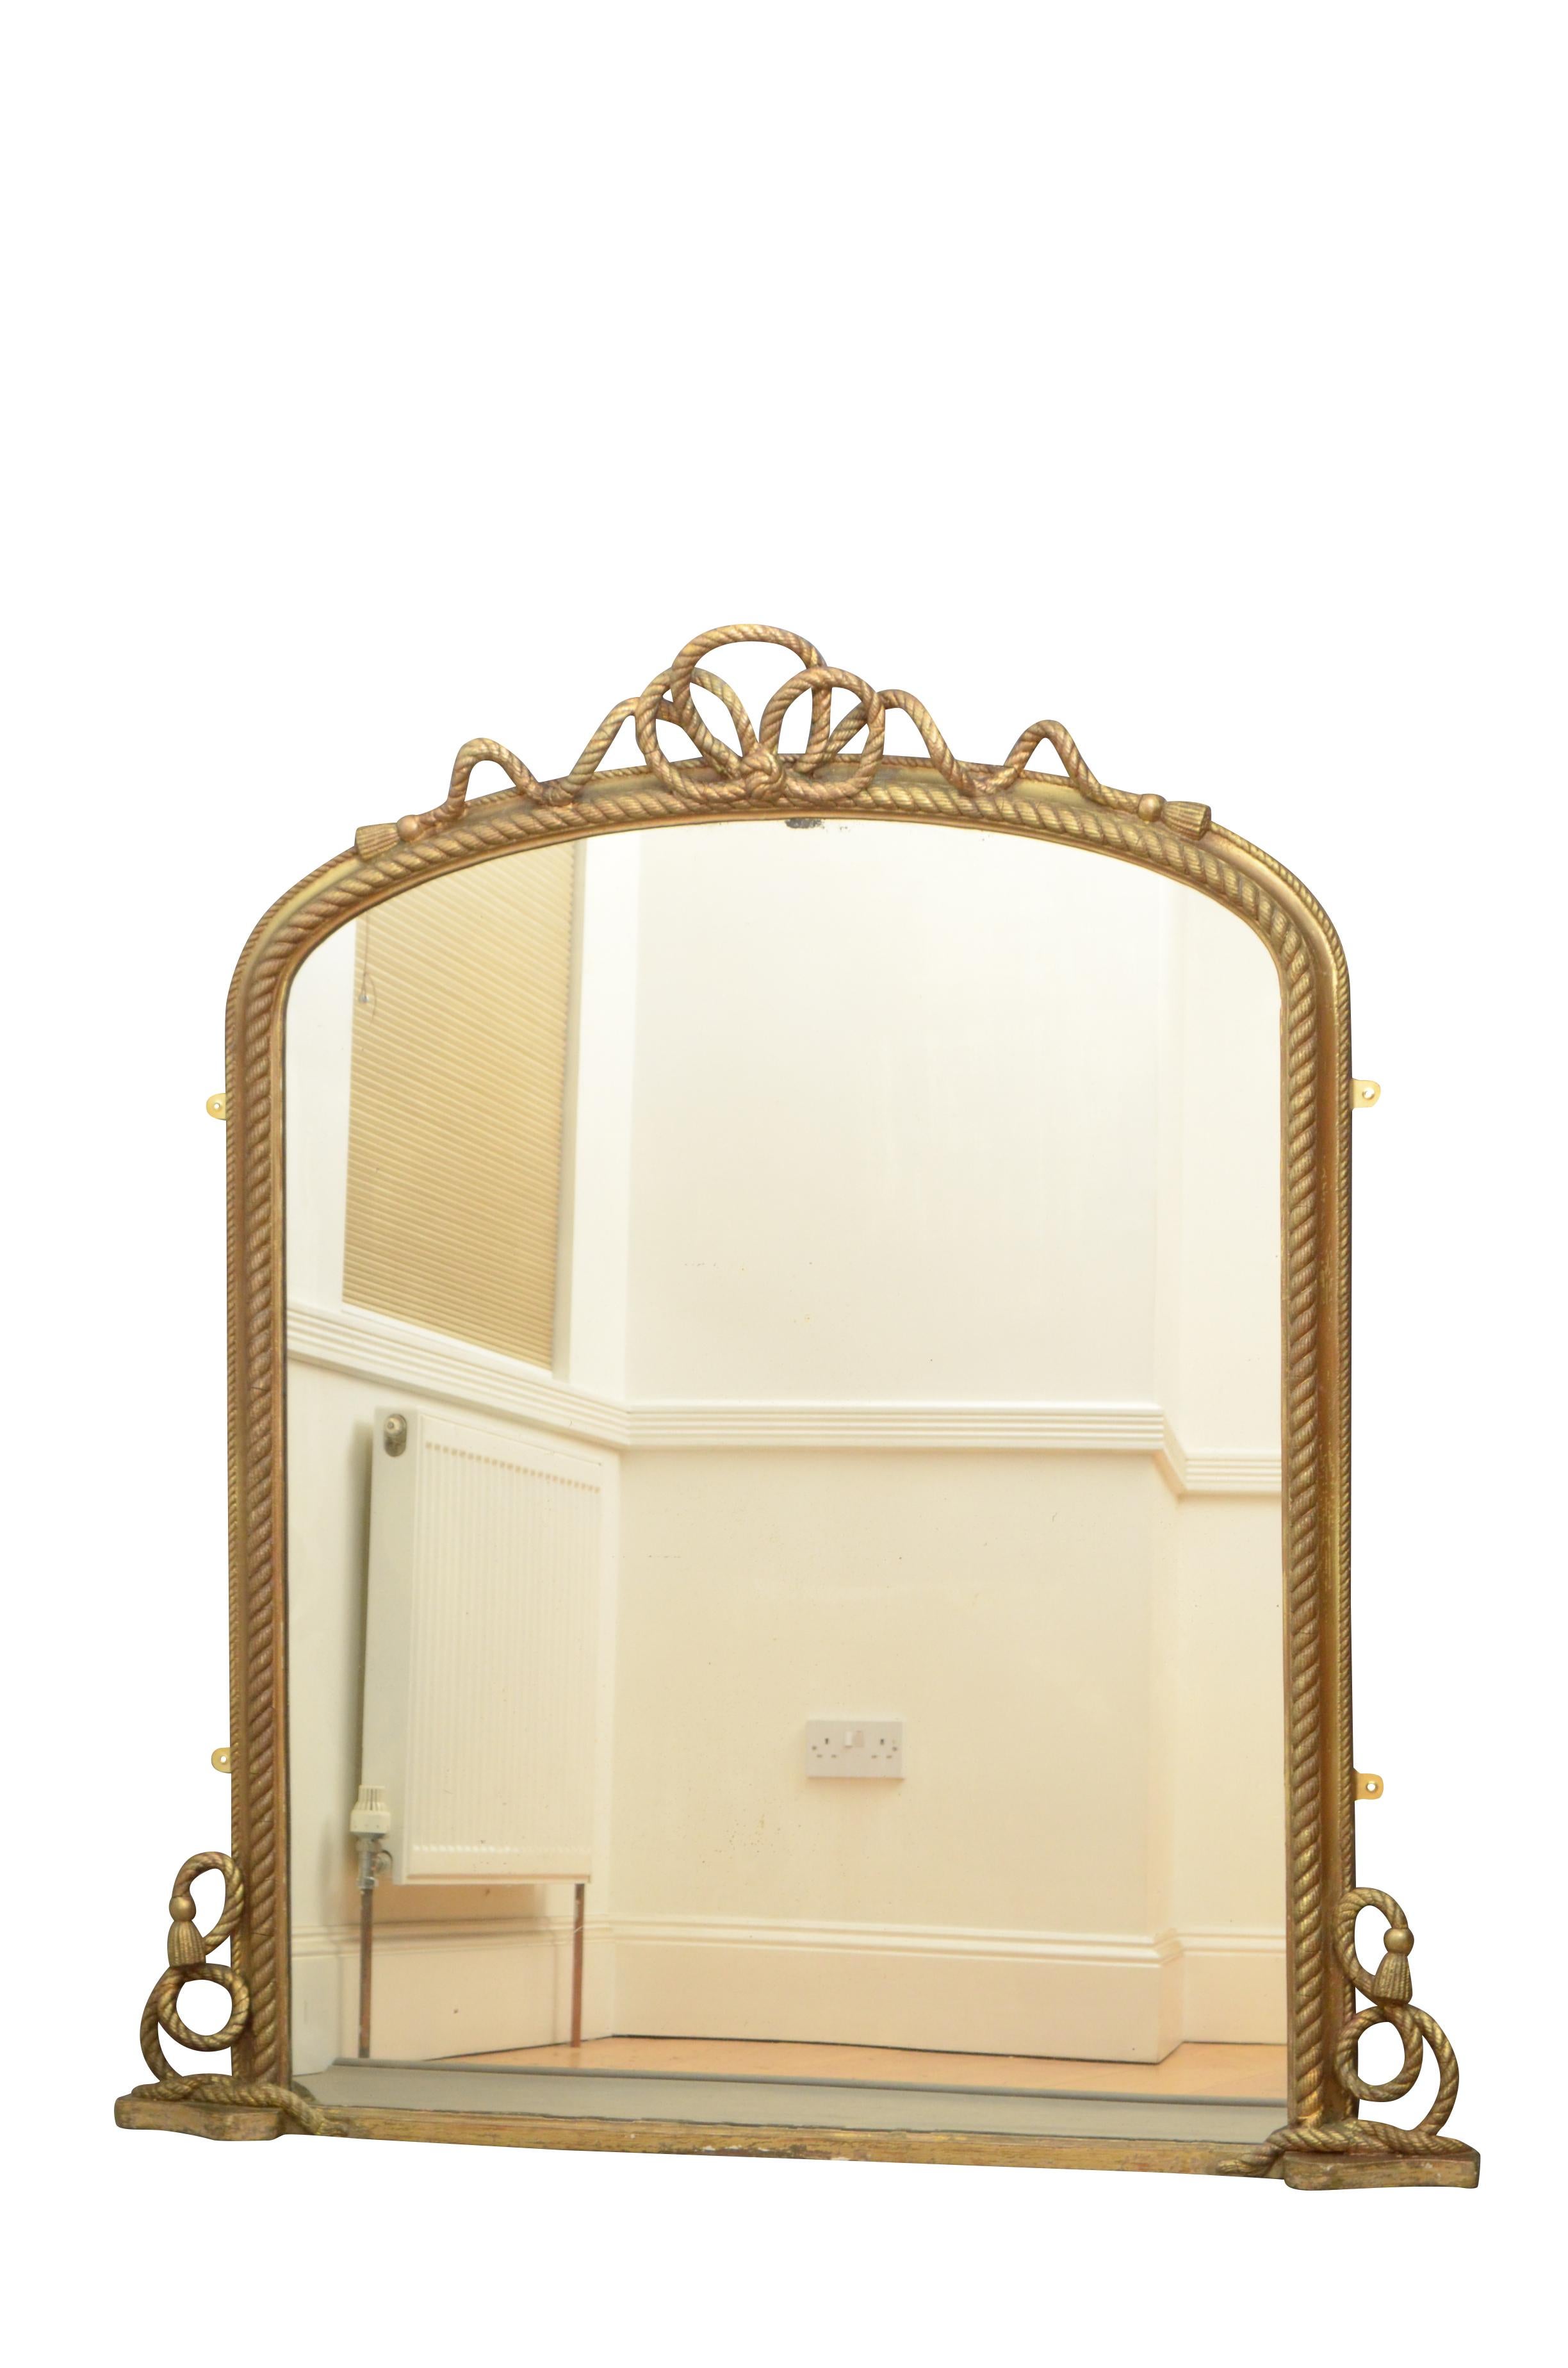 Stylish Victorian giltwood wall mirror / over mantel mirror with original glass with some foxing in rope decorated gilded frame. This antique mirror retains its original glass, parts of original gilt with extensive touching up over the years and